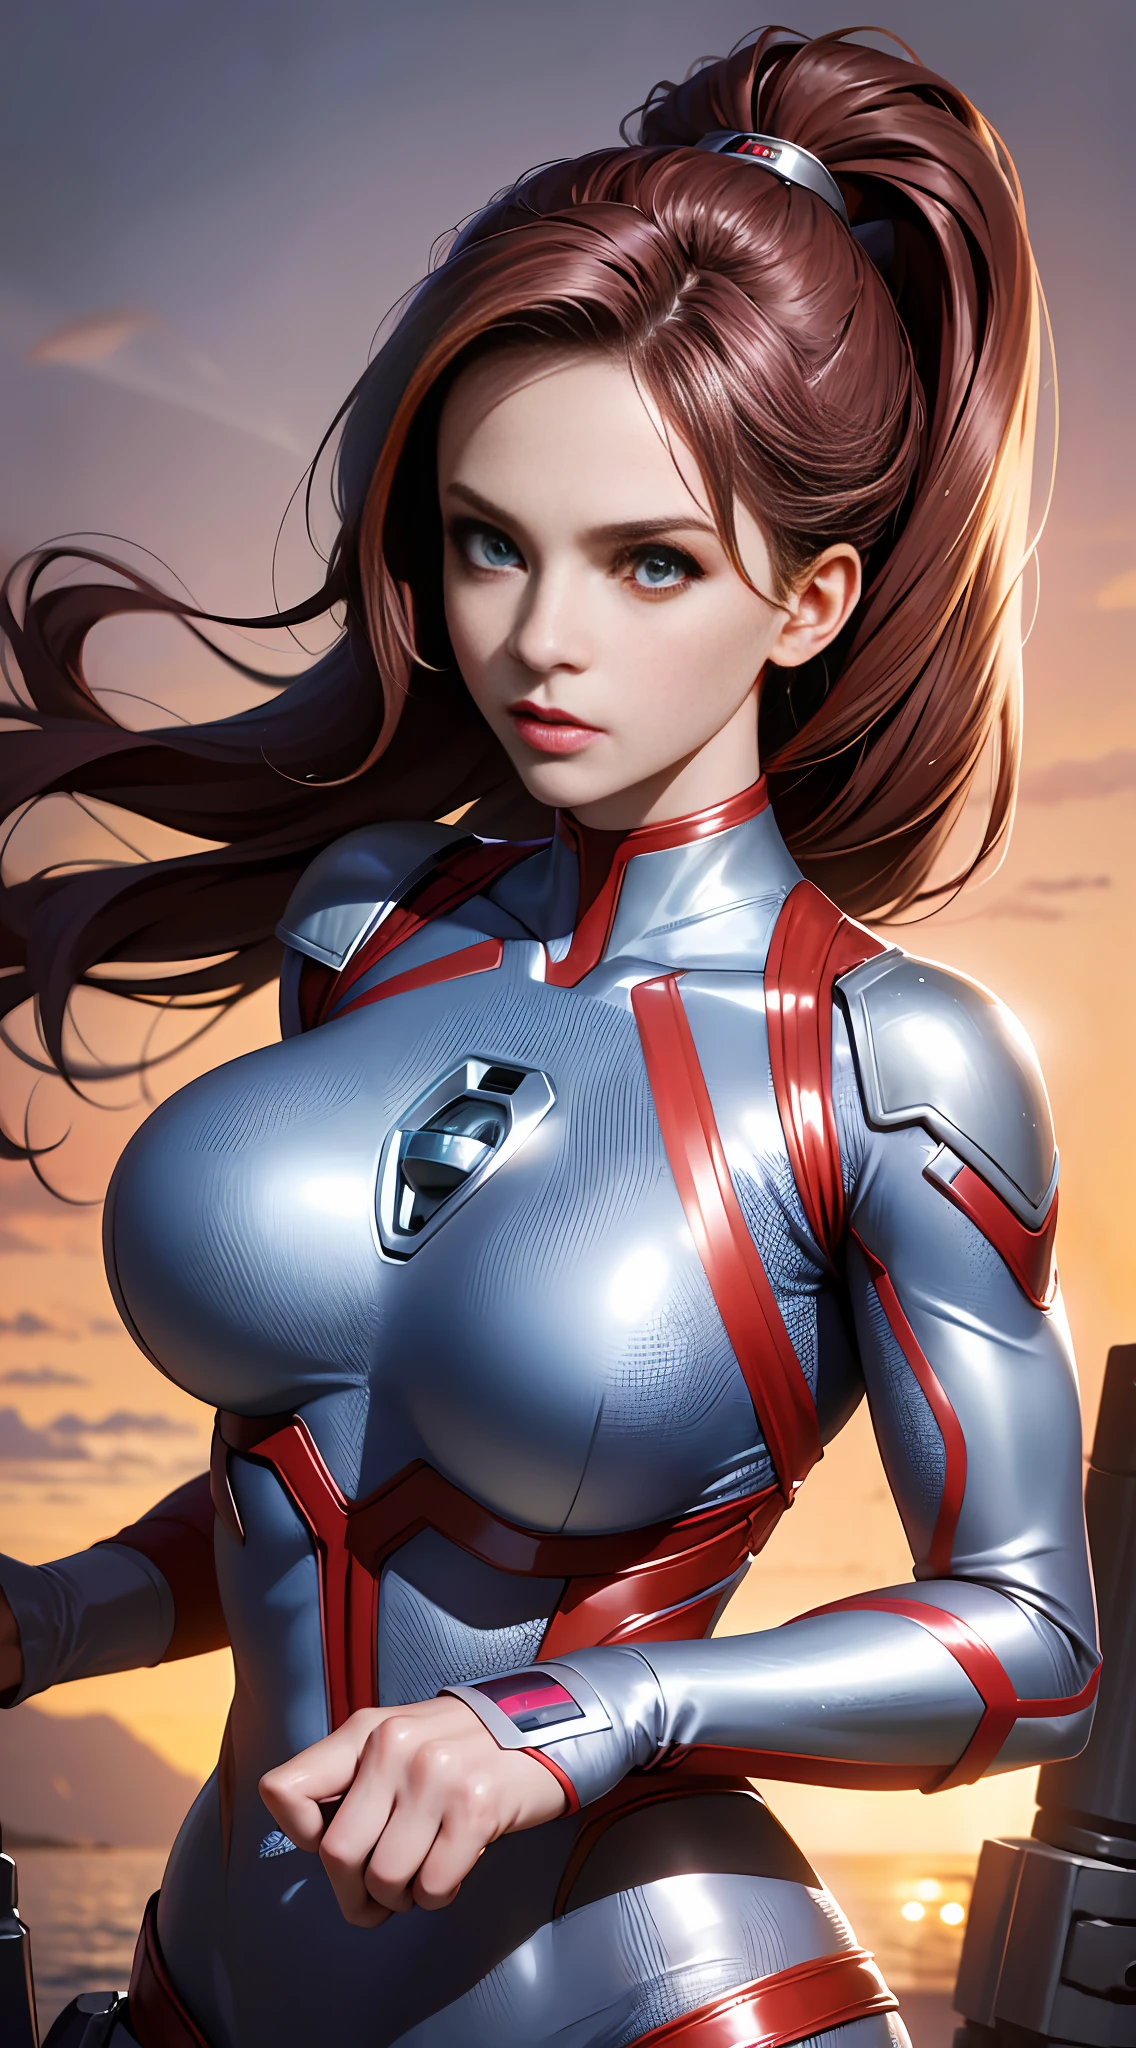 High quality fingers, normal hands, detailed fingers, masterpiece, (realistic, photorealistic: 1.37), (22-year-old woman), galaxy Ultraman, female Ultraman, classic red silver tights, energy indicator with blue light on the chest, {{huge_breast}}, small waist, crimson hair, blue eyes, beautiful face, perfect lighting, determined eyes, looking at the audience, amazing beautiful woman, detailed hairstyle, detailed background